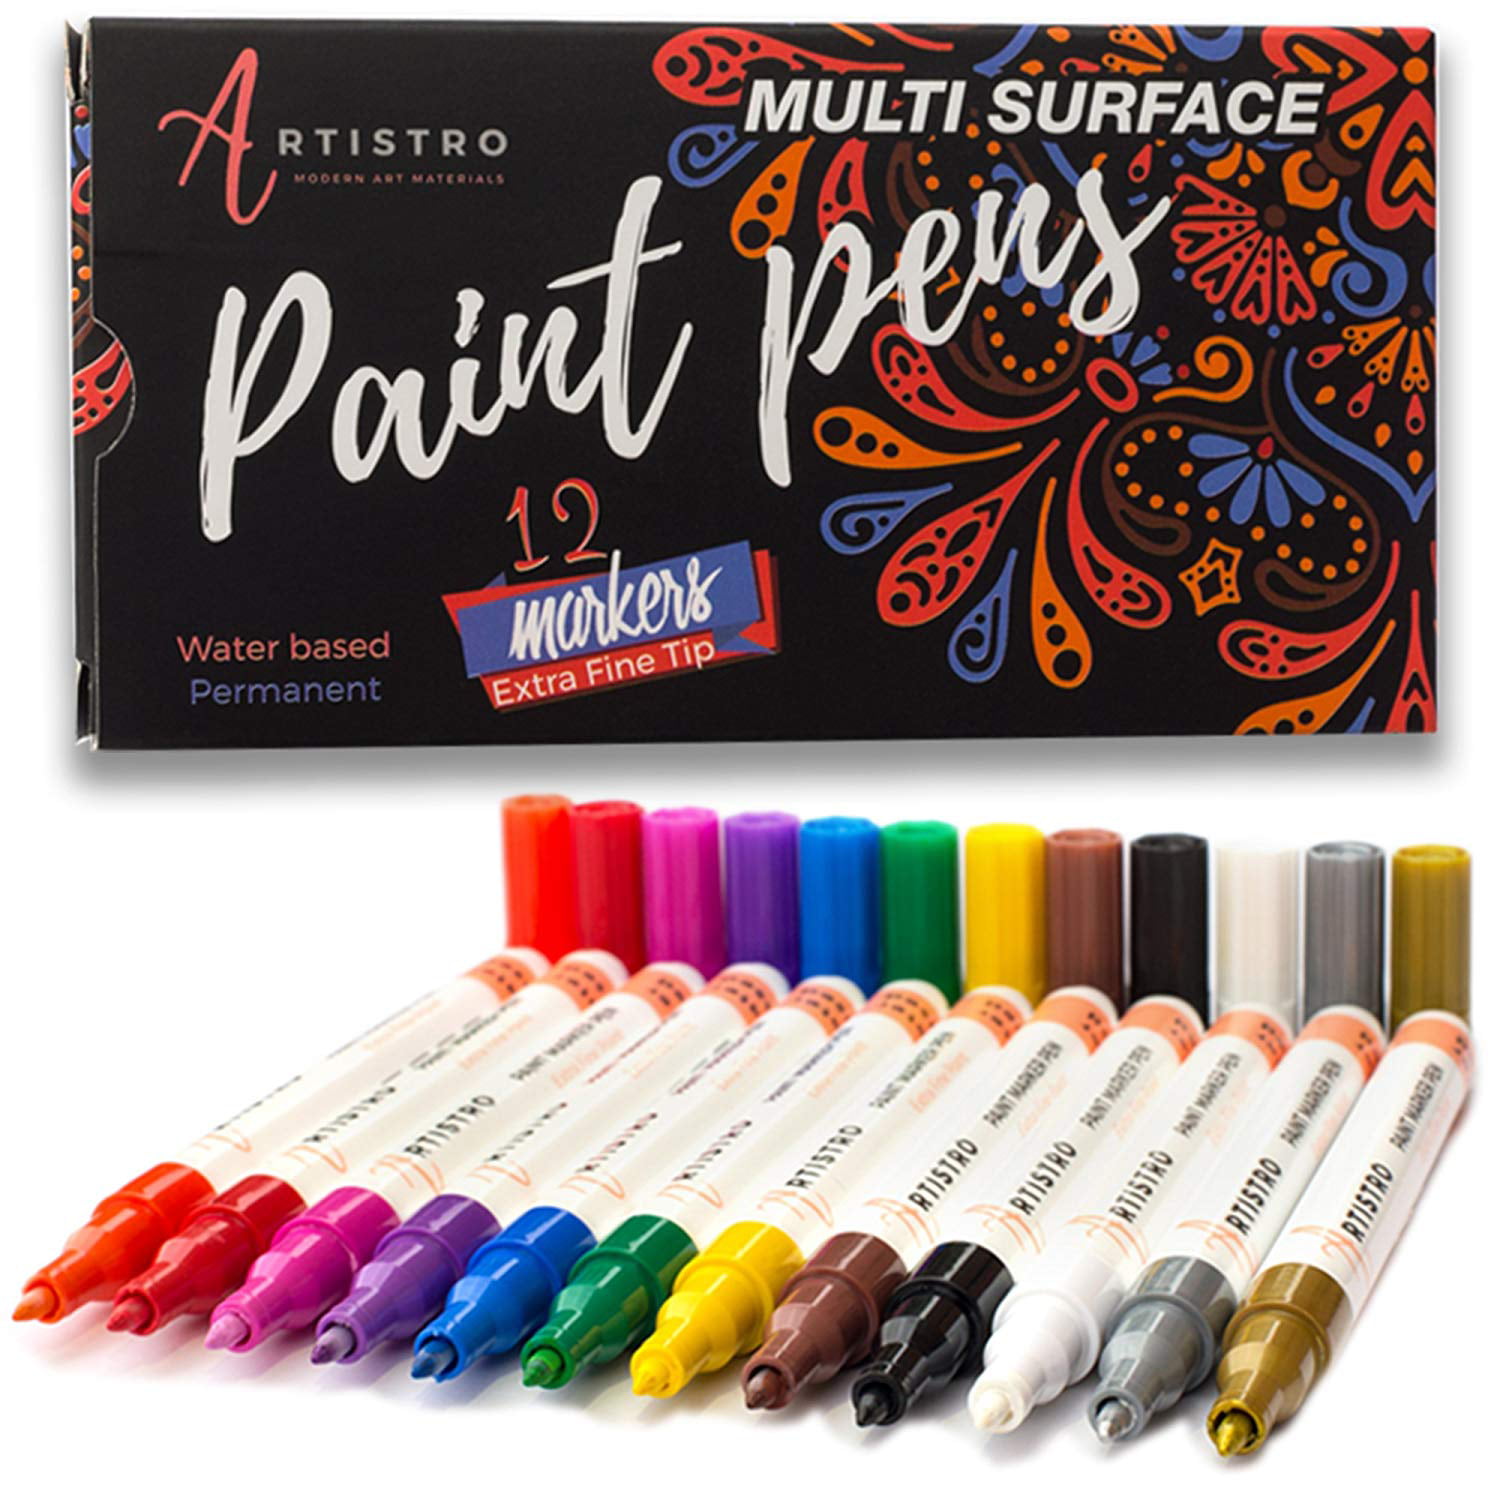 Paint pens for Rock Painting. Stone. Ceramic. Glass. Extra fine Point tip. Set of 12 Water Based